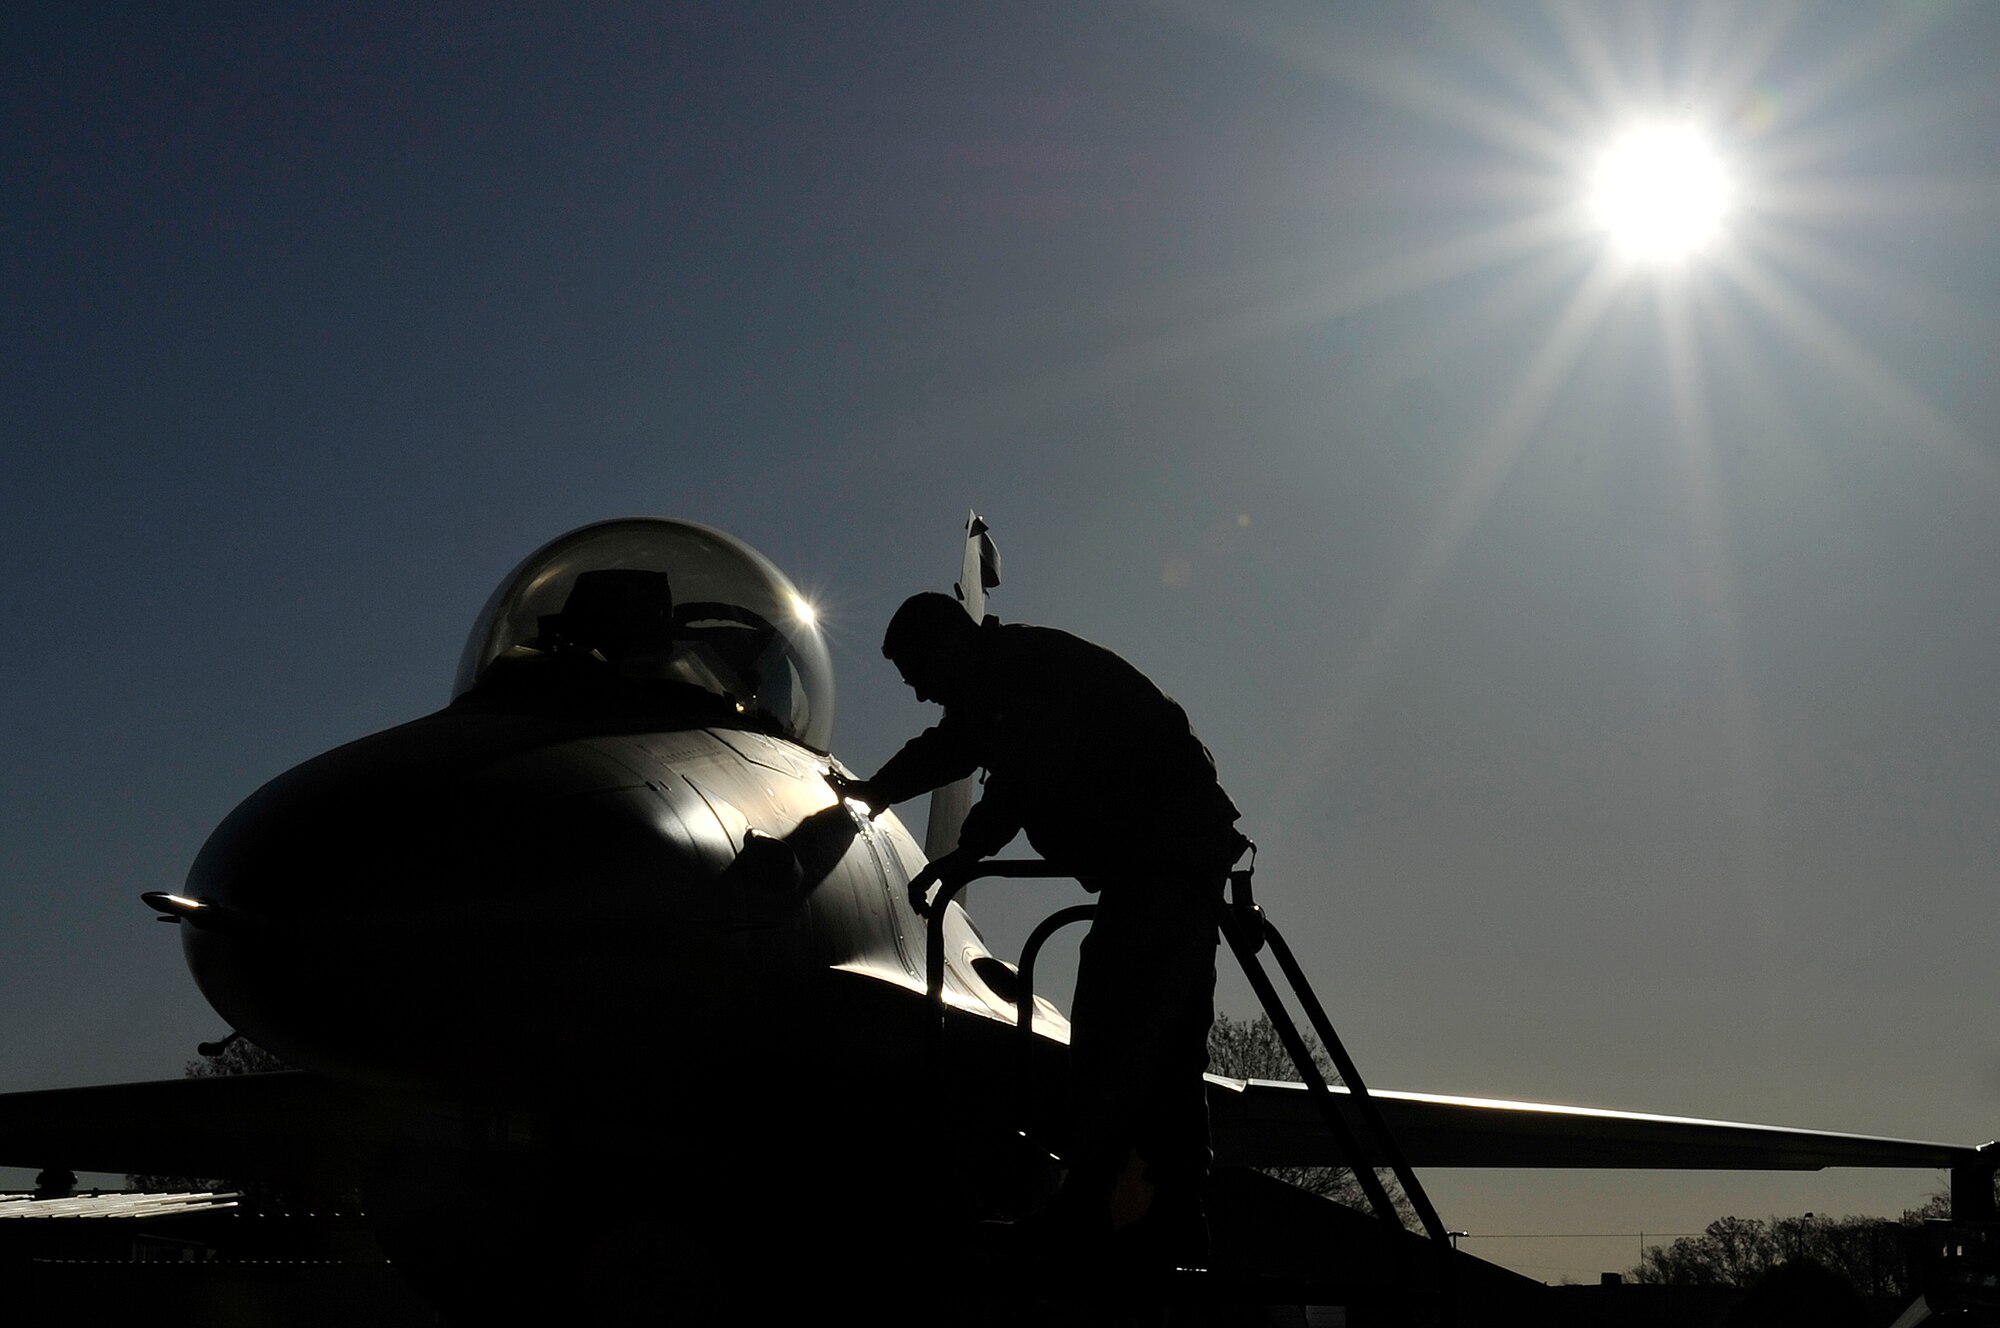 An Airman from the 113th Aircraft Maintenance Squadron prepares an F-16 Fighting Falcon for a training mission April 3, 2012 at Joint Base Andrews, Md. The 113th Wing provides air sovereignty forces to defend the National Capital Region and also provides fighter, airlift and support forces capable of local, national and global employment. (U.S. Air Force Photo/Senior Airman Perry Aston)